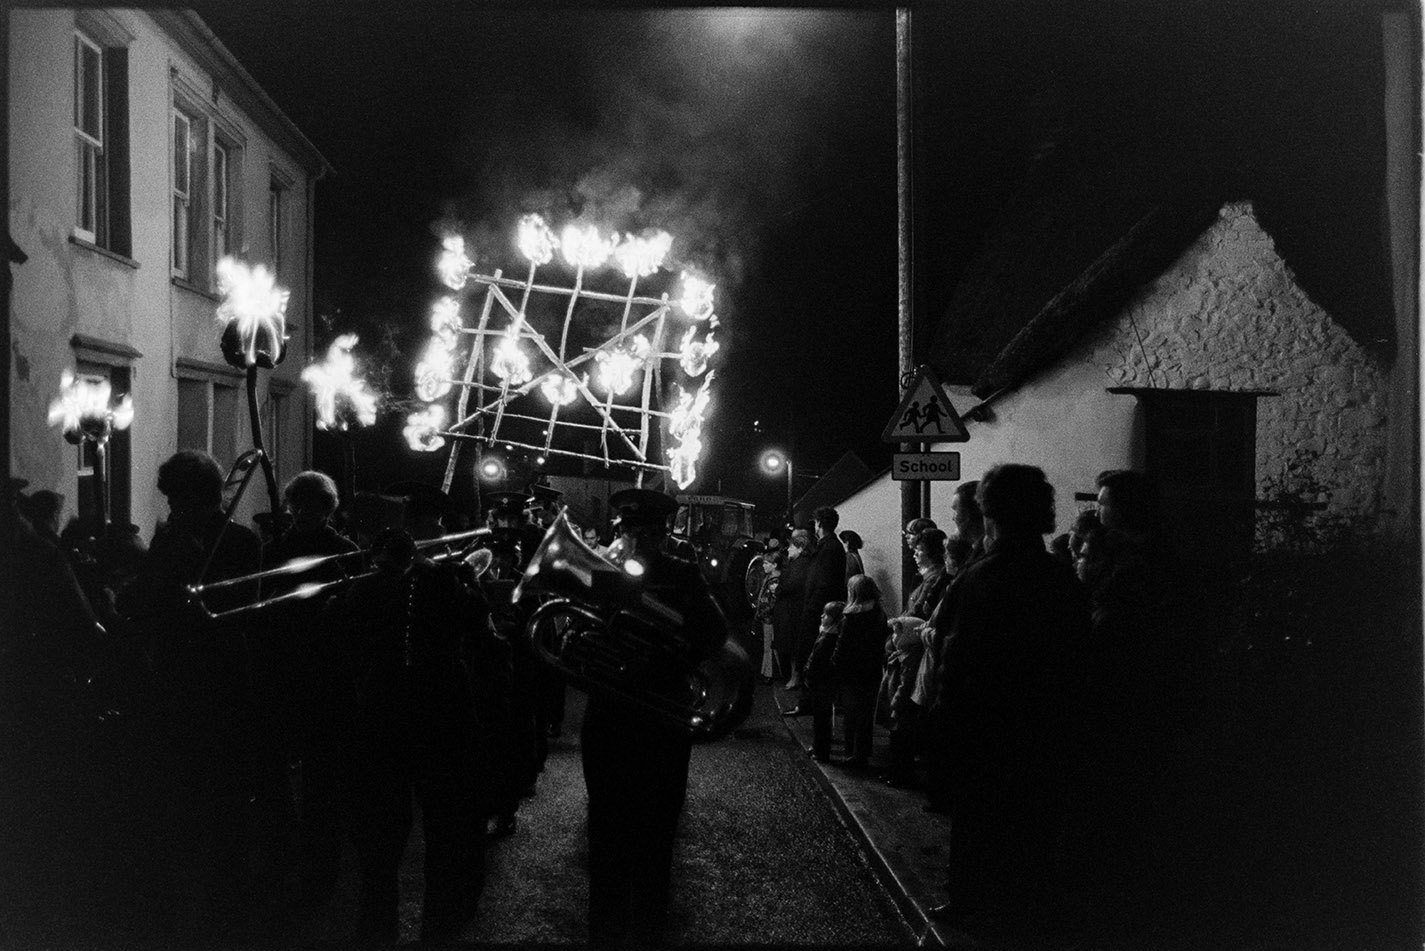 Carnival procession at night with burning torches, Hatherleigh, 6 November 1974